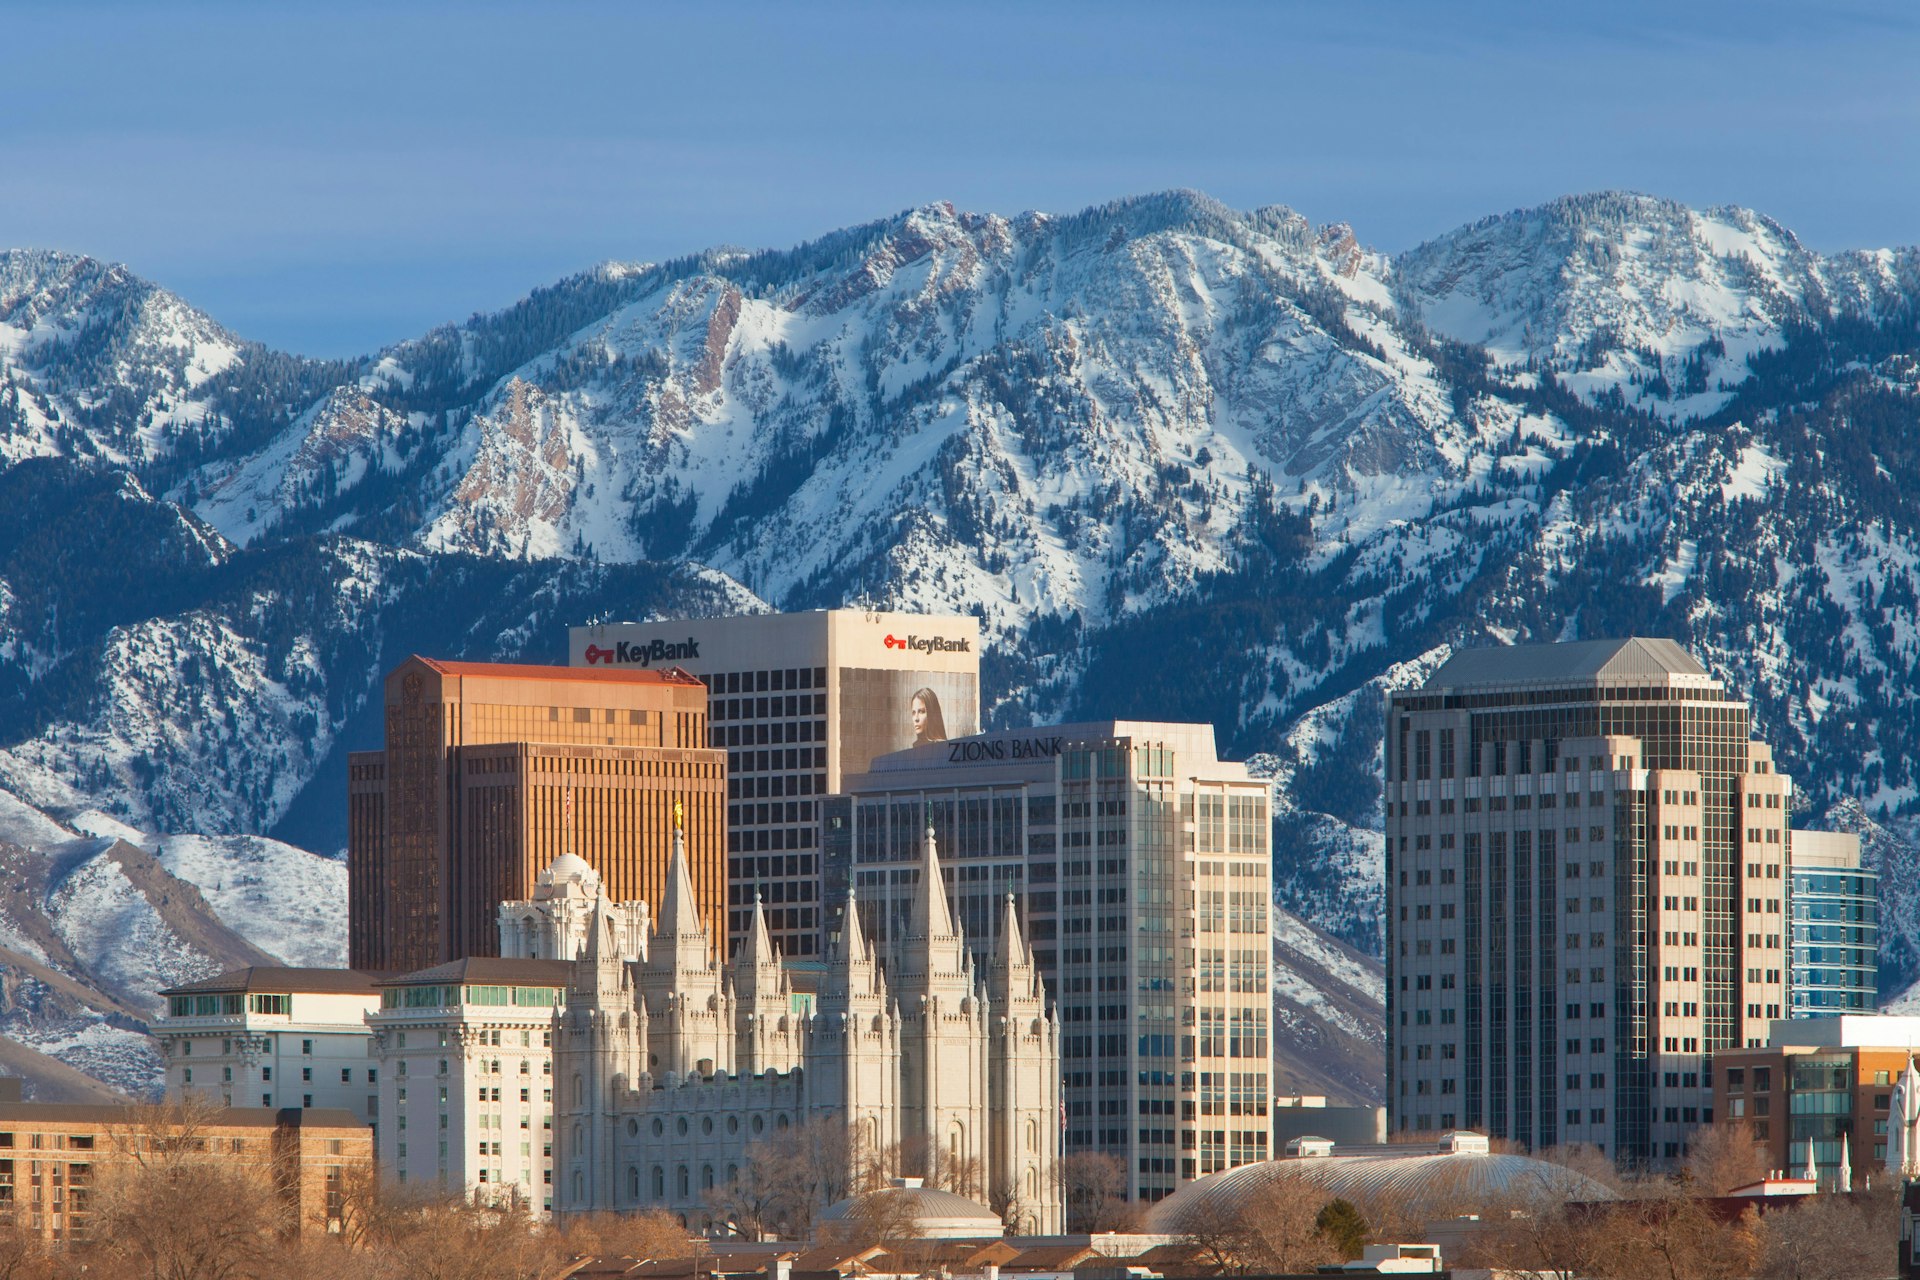 Mormon Tabernacle and buildings of Salt Lake City with the Wasatch Mountains beyond, Utah USA. Image shot 2012. Exact date unknown.